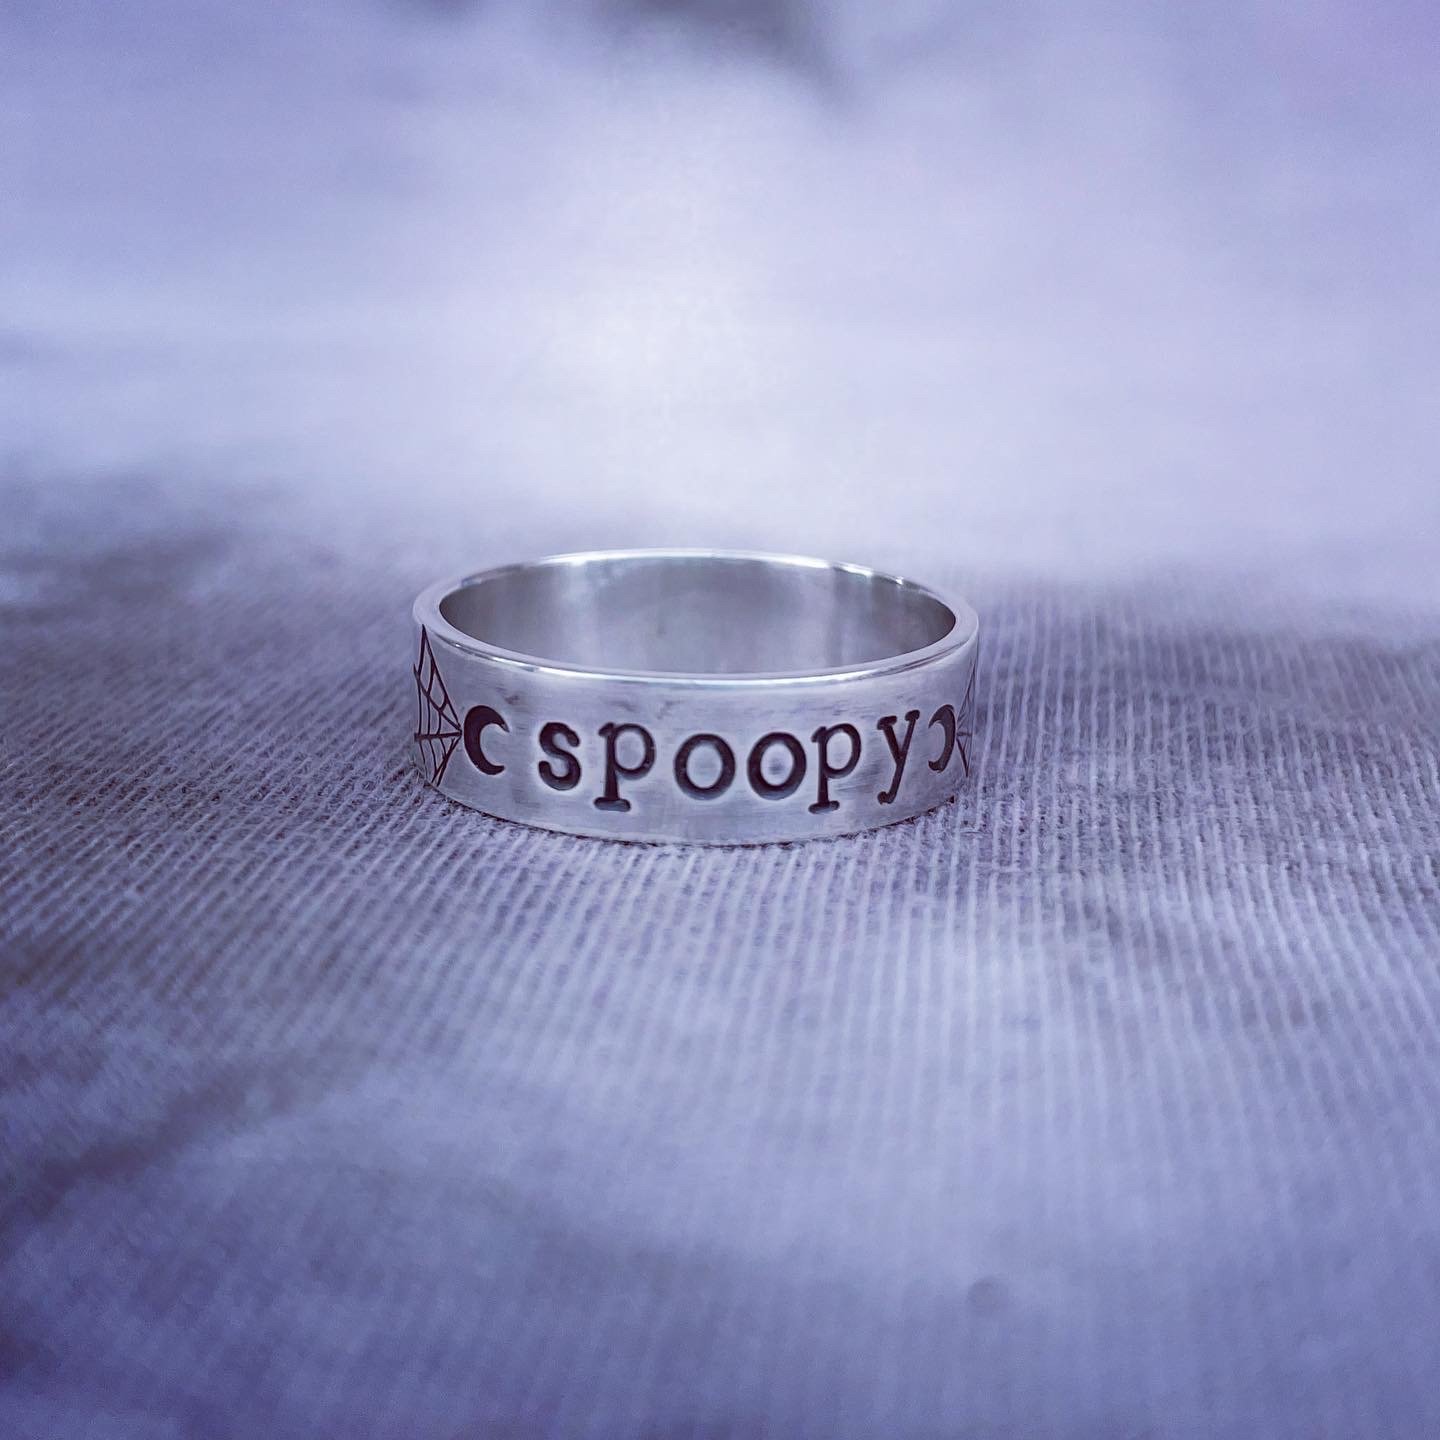 Image of Spooky silver ring with moon and spider web stamps. Spooky halloween silver 925 ring.